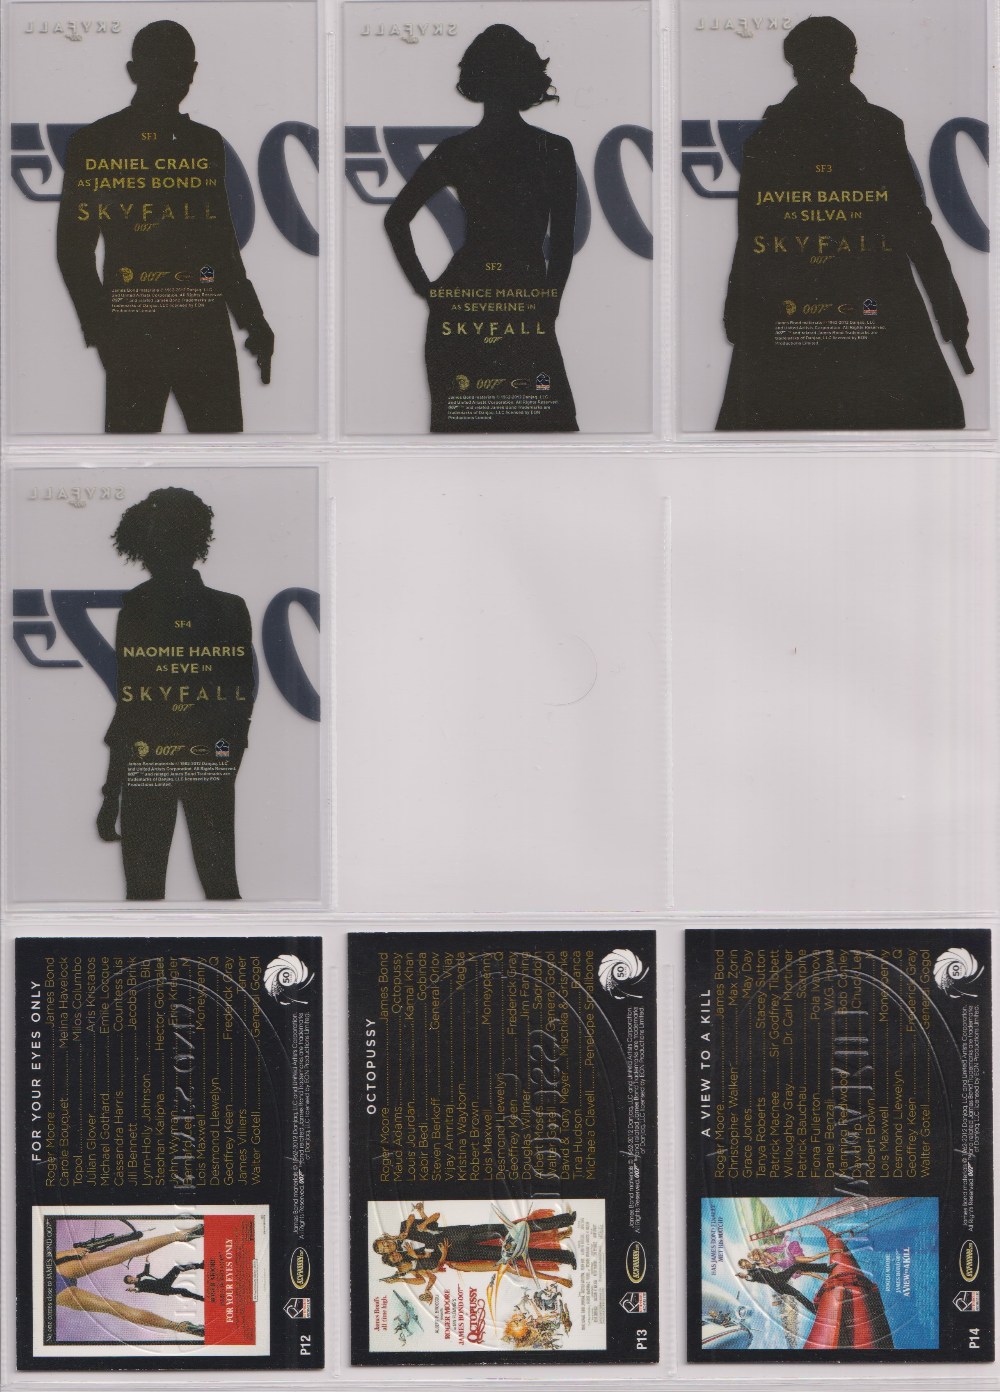 James Bond, 50th Anniversary Trading Cards Gold Cards (set of 198), Skyfall silhouette (4), Gold - Image 10 of 37